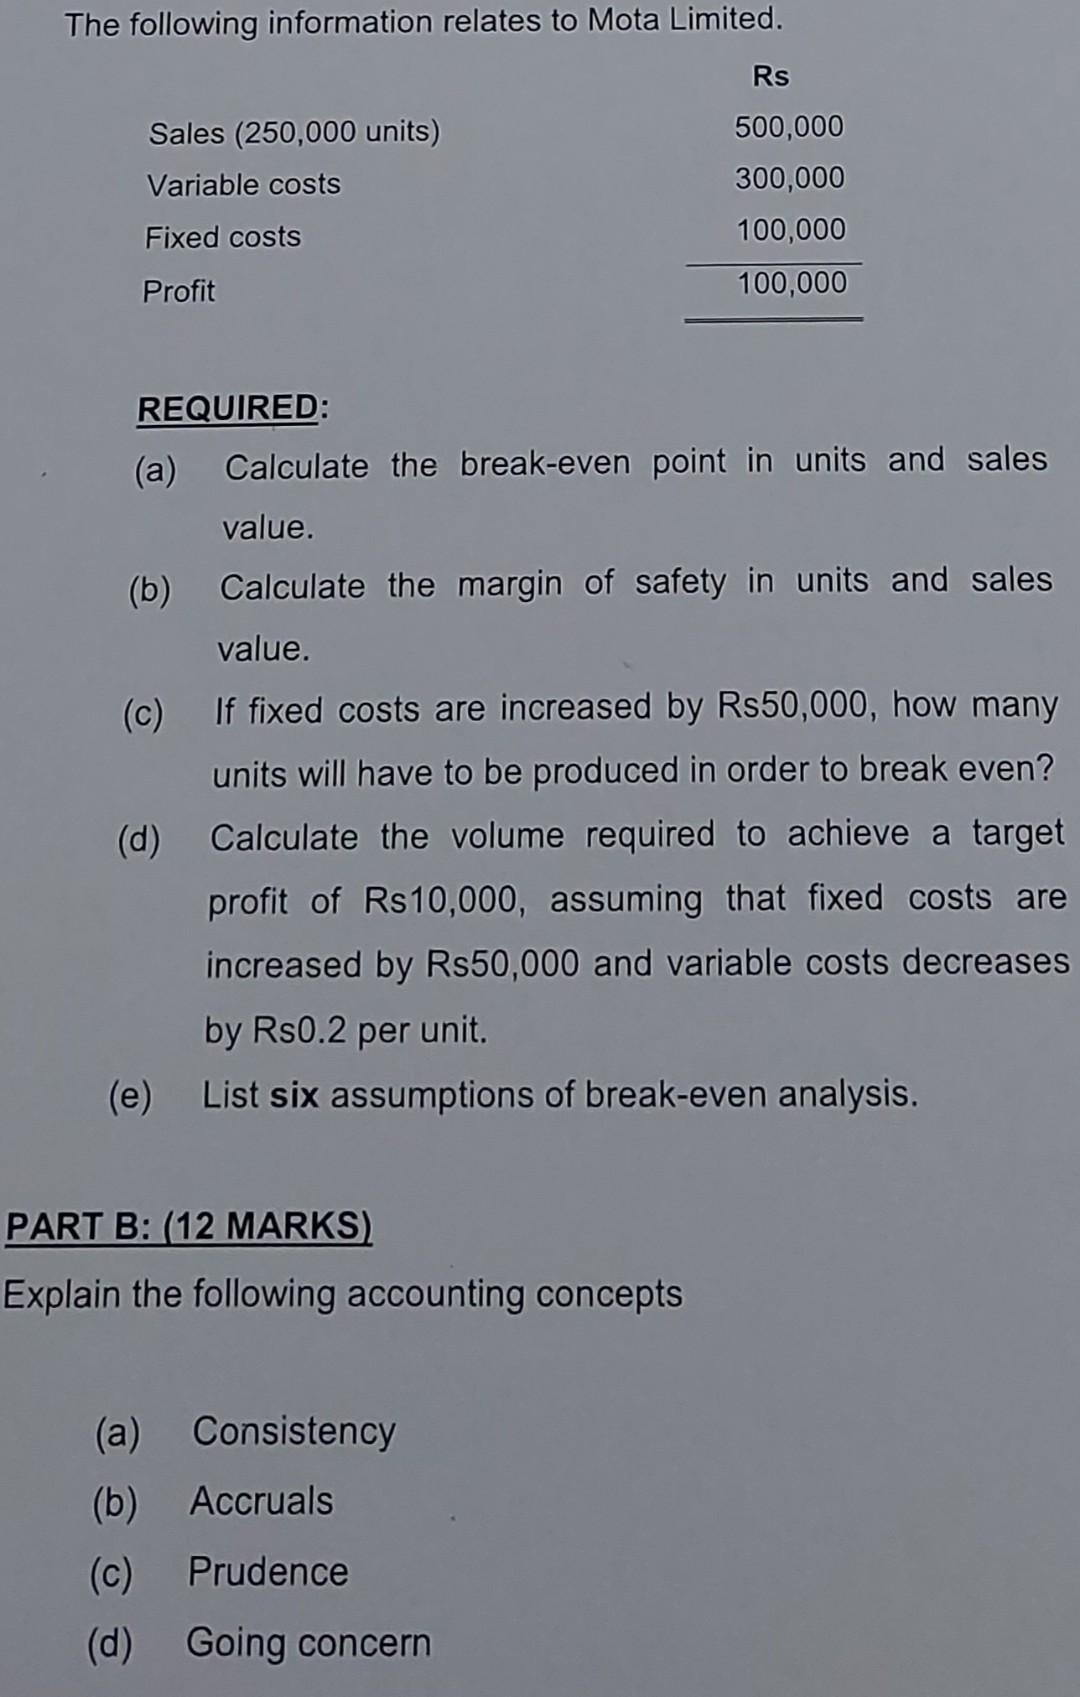 The following information relates to Mota Limited. Sales (250,000 units) Variable costs Fixed costs Profit